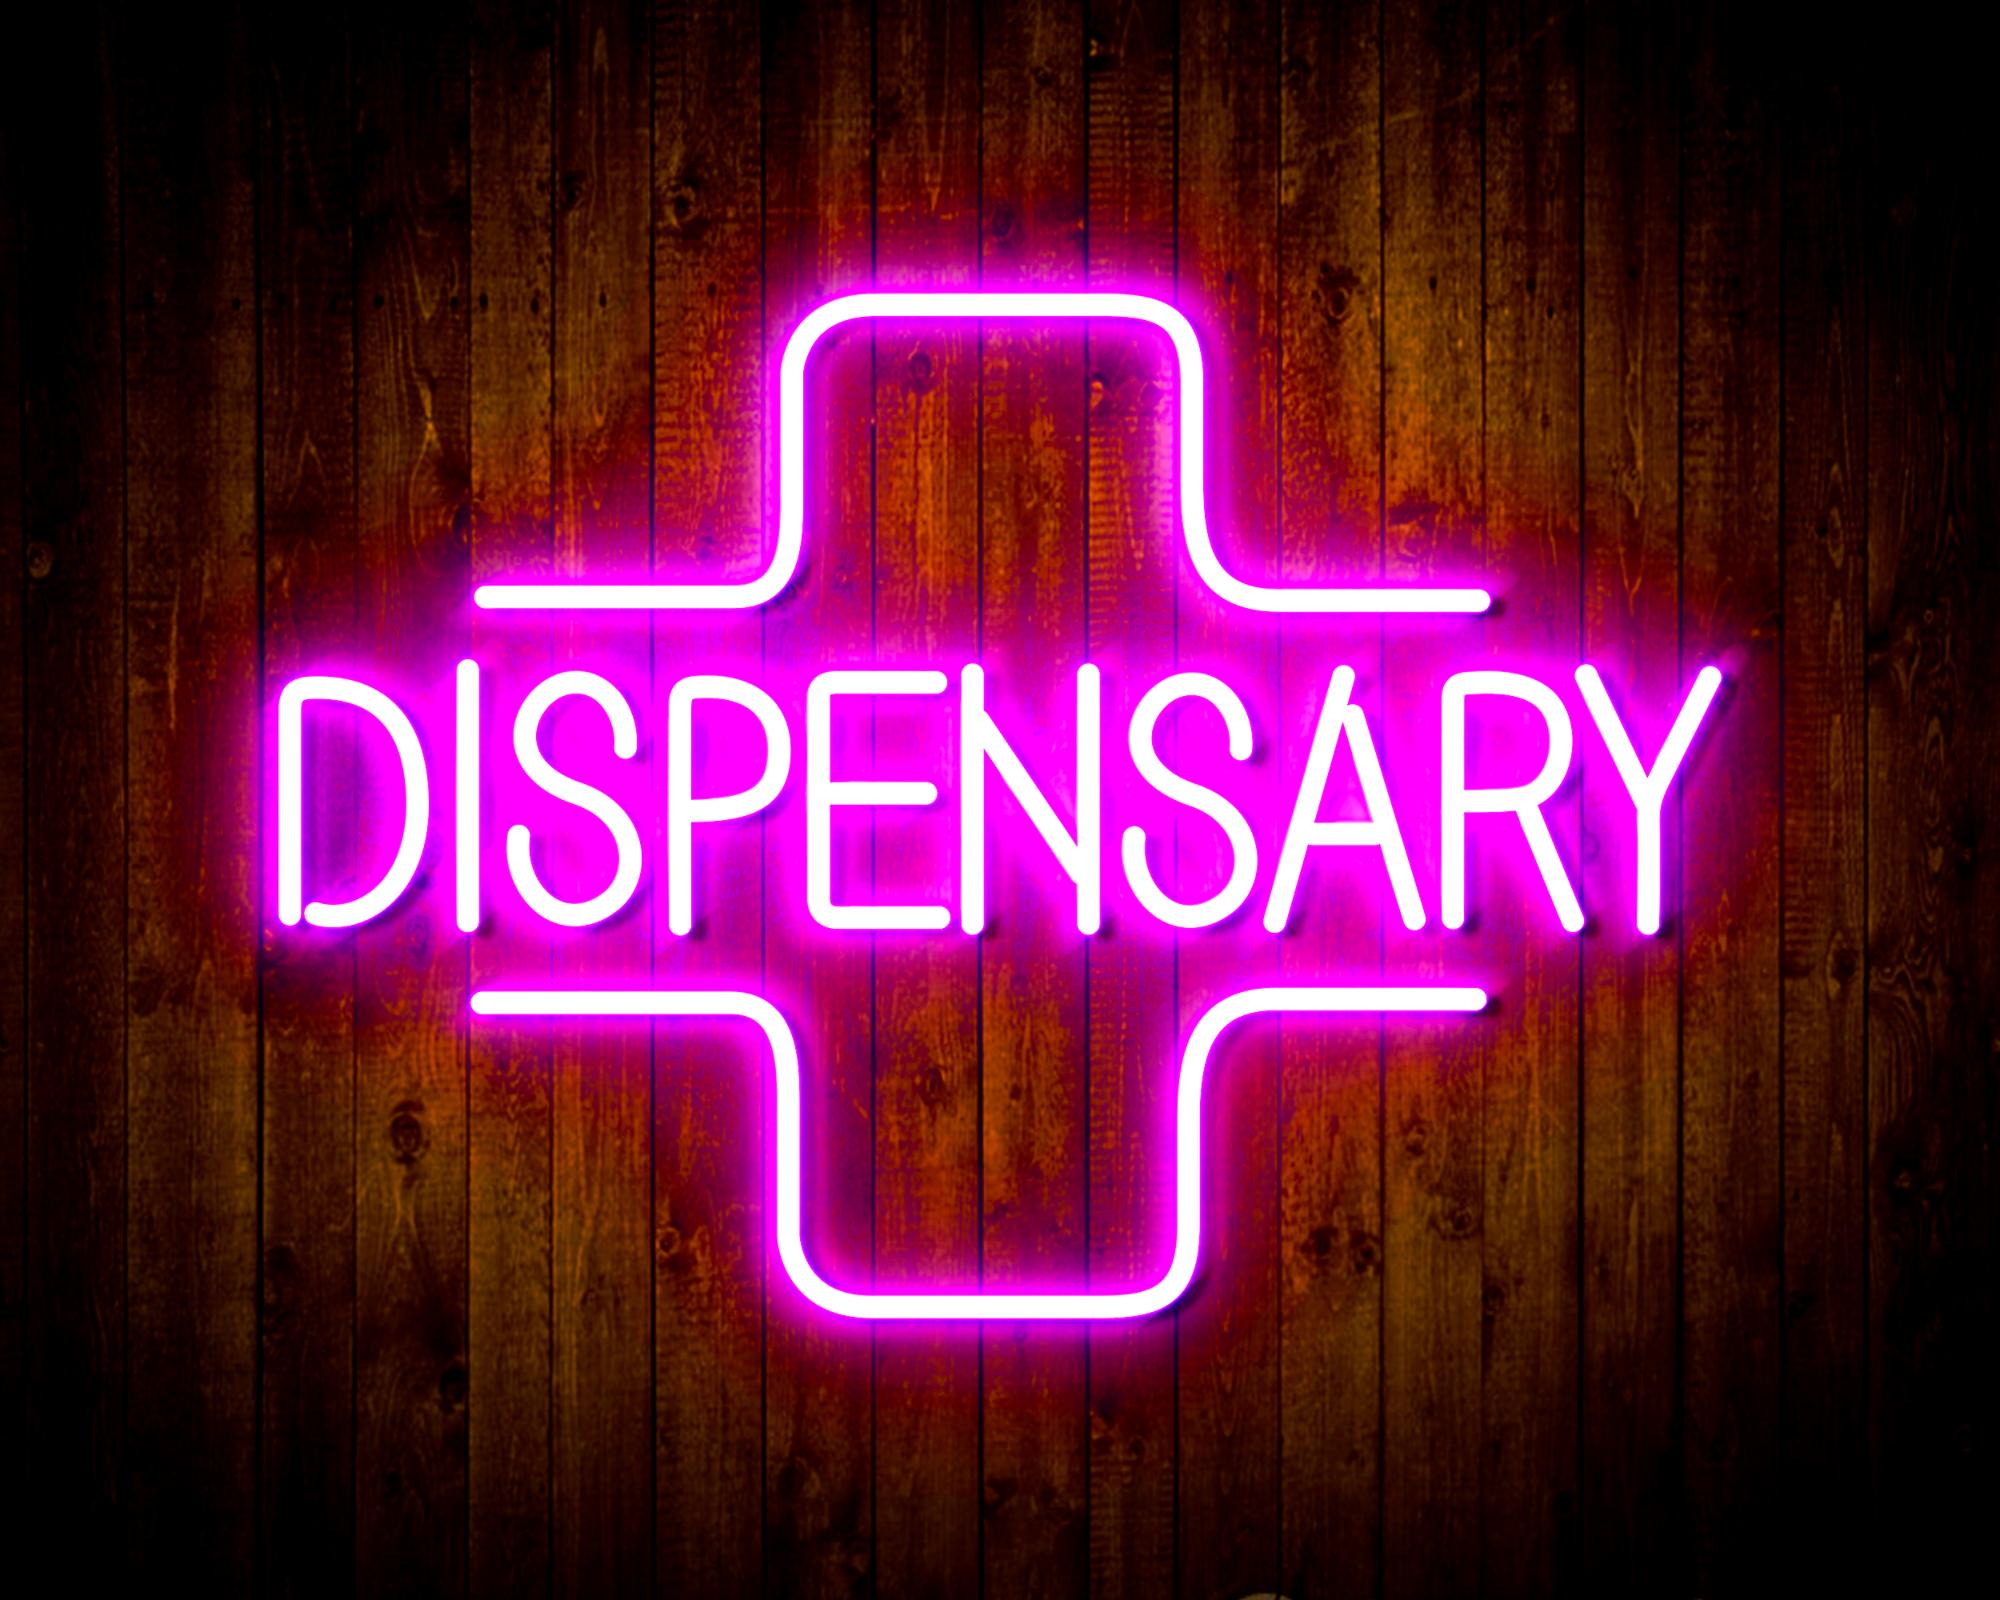 Dispensary with Cross LED Neon Sign Wall Light